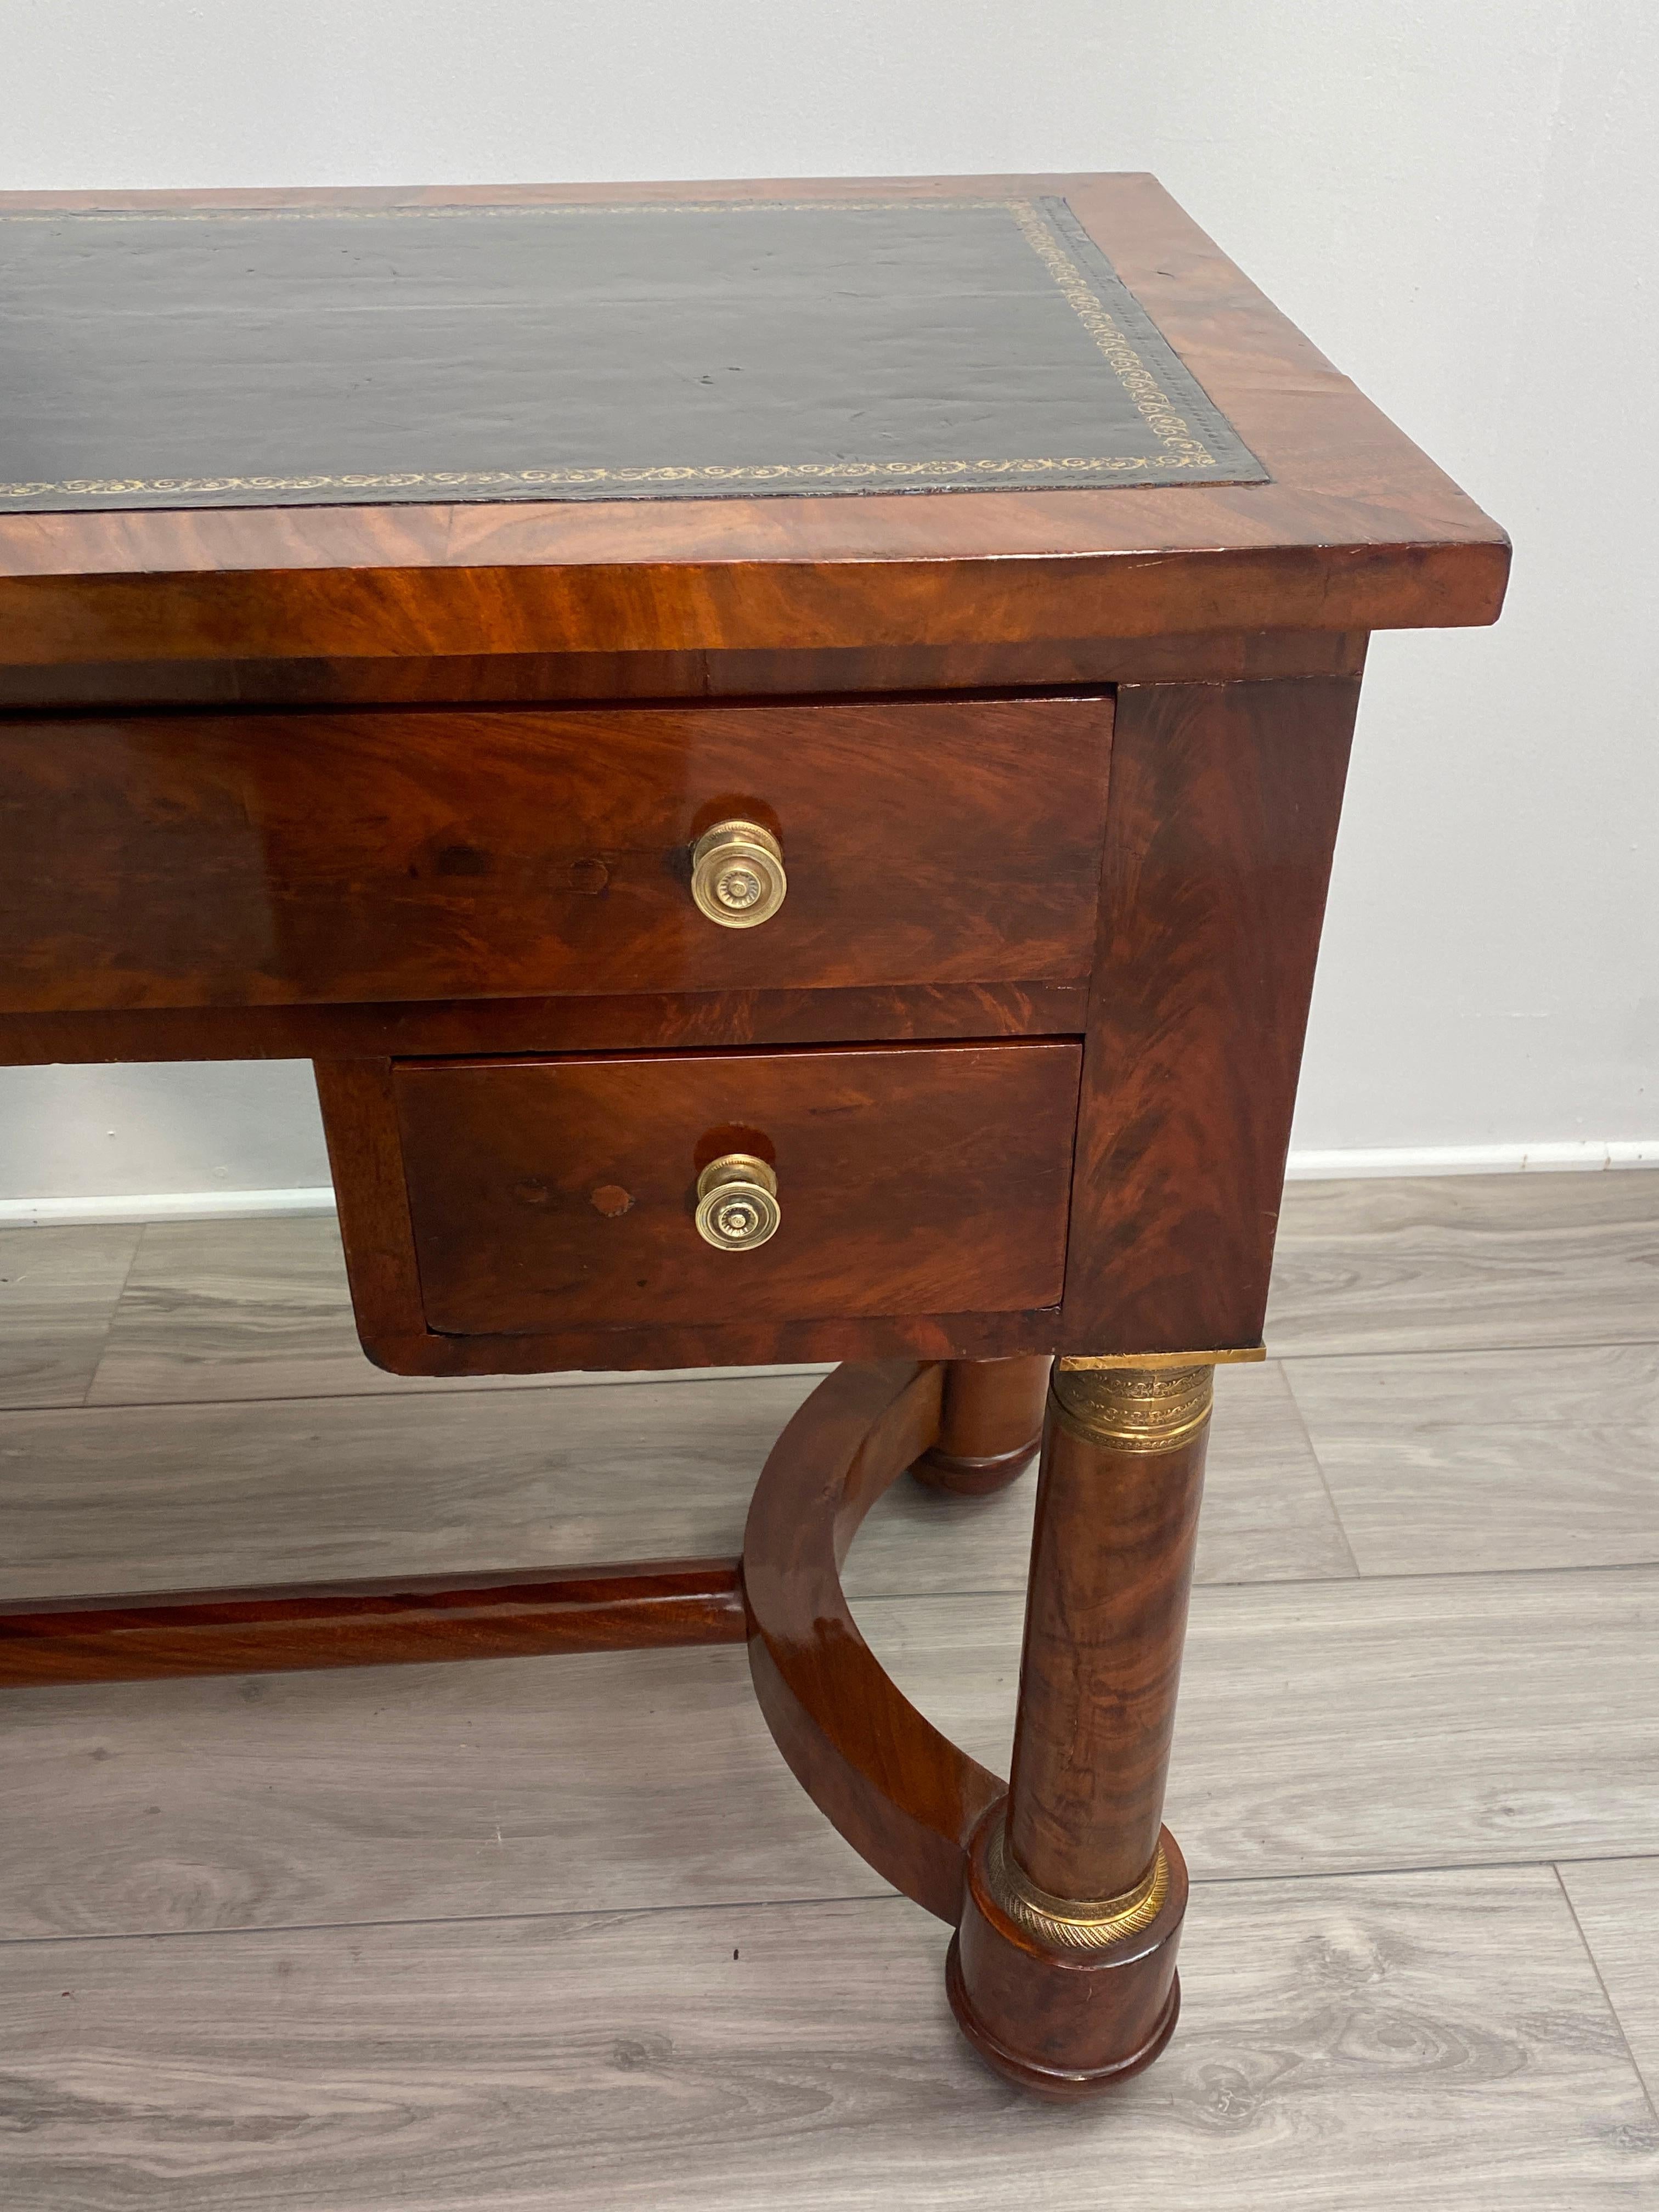 Mahogany veneered French Empire desk. Leather insert top. Brass hardware on column legs and bun feet. Very unique and good quality period French desk. Highly French polished.